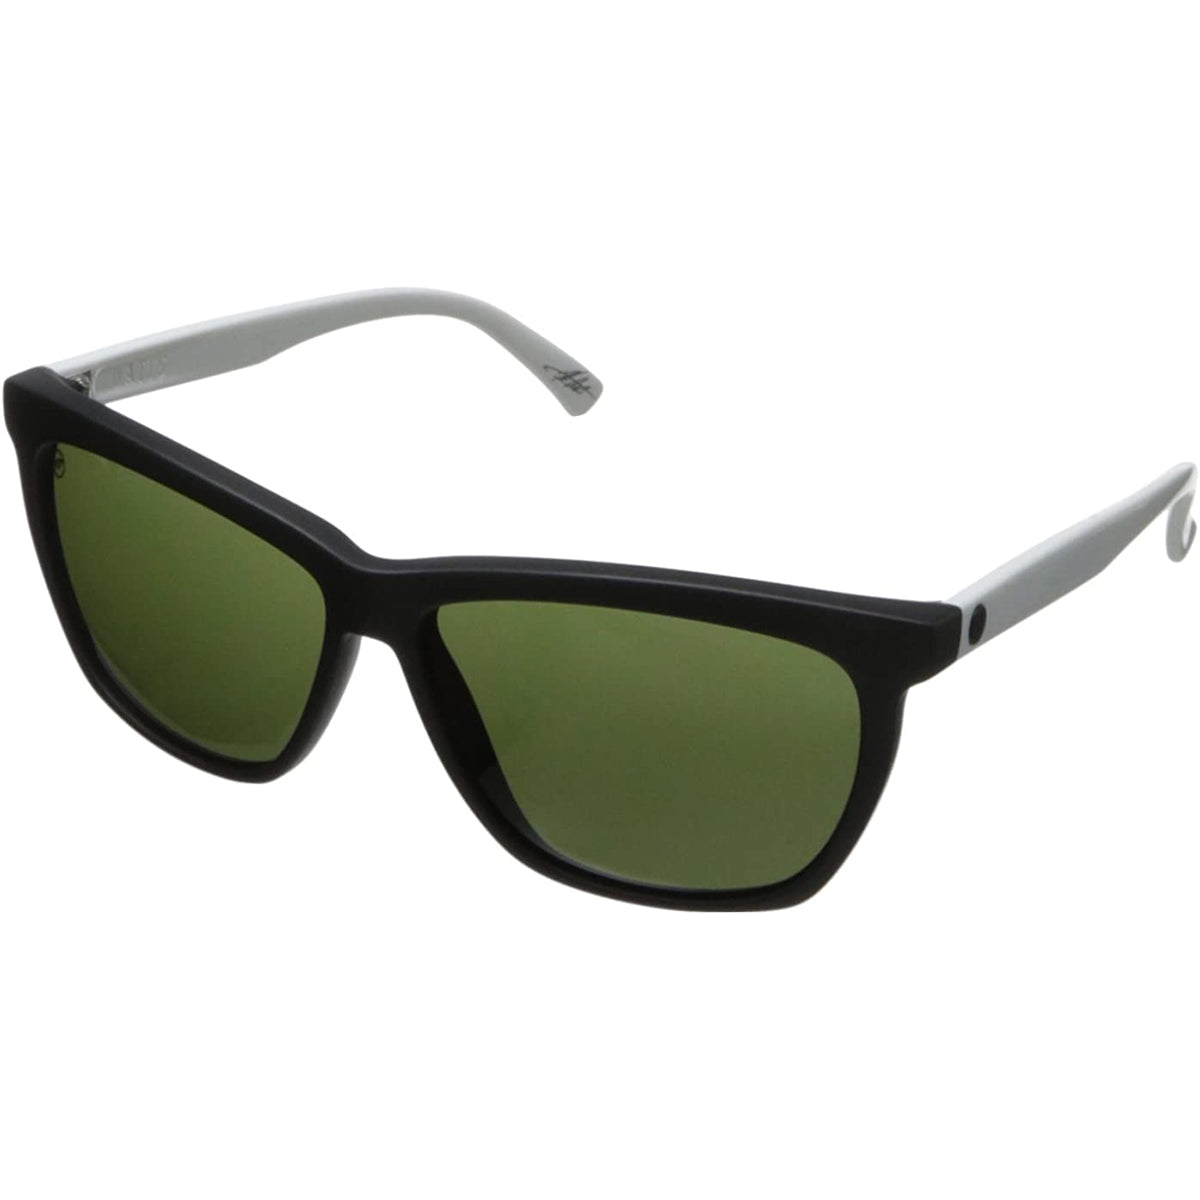 Electric Watts Adult Lifestyle Sunglasses Brand New -EE11950220